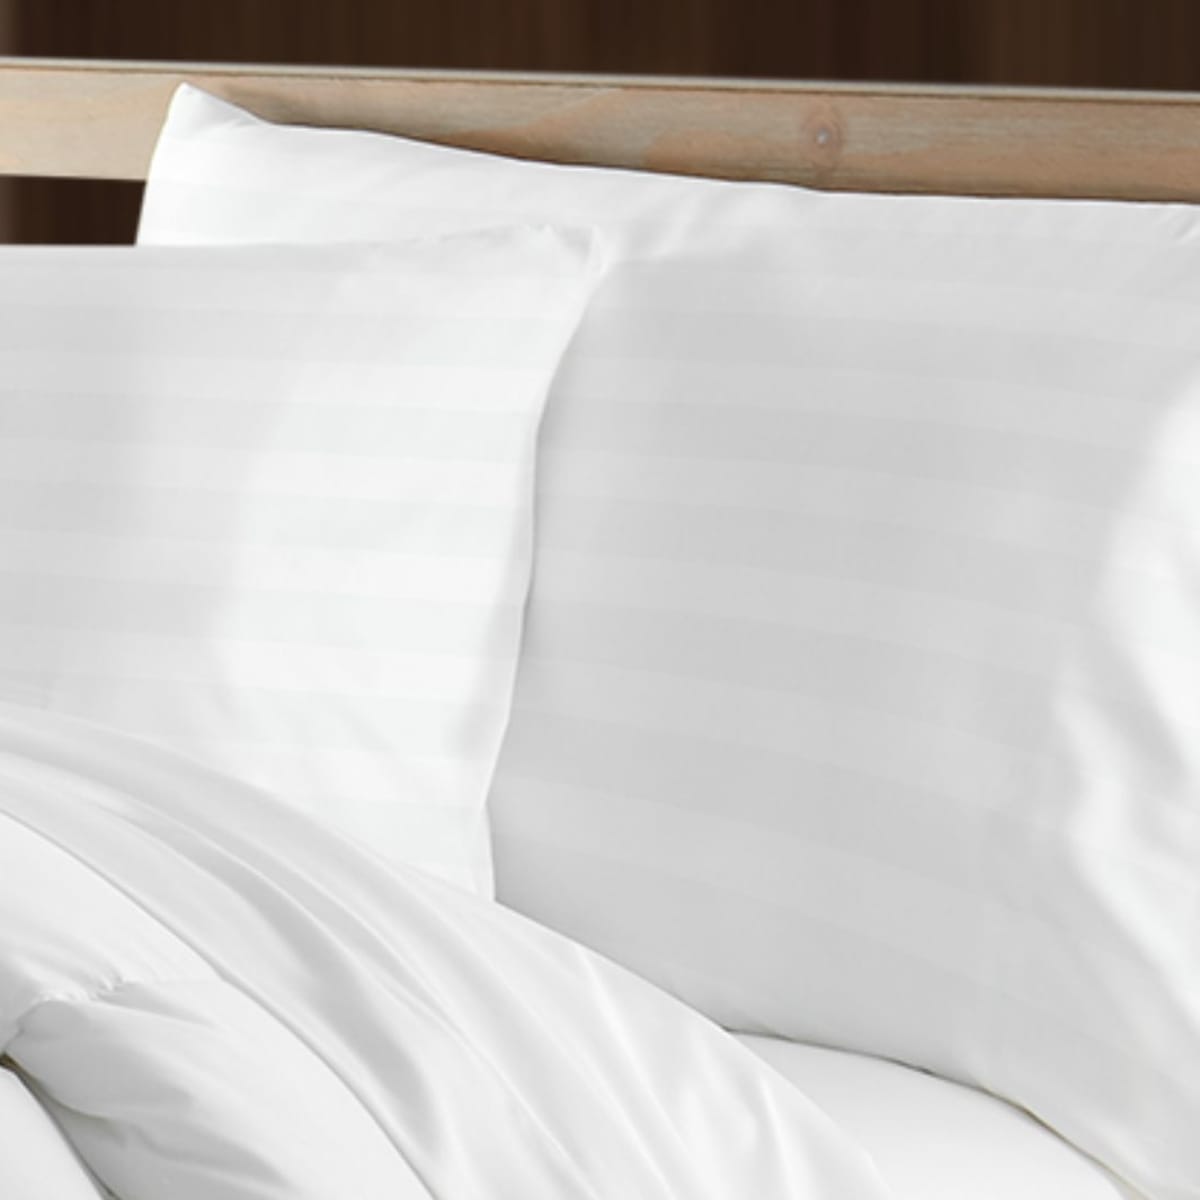 The Beckham Hotel Collection pillows are 40% off for Black Friday